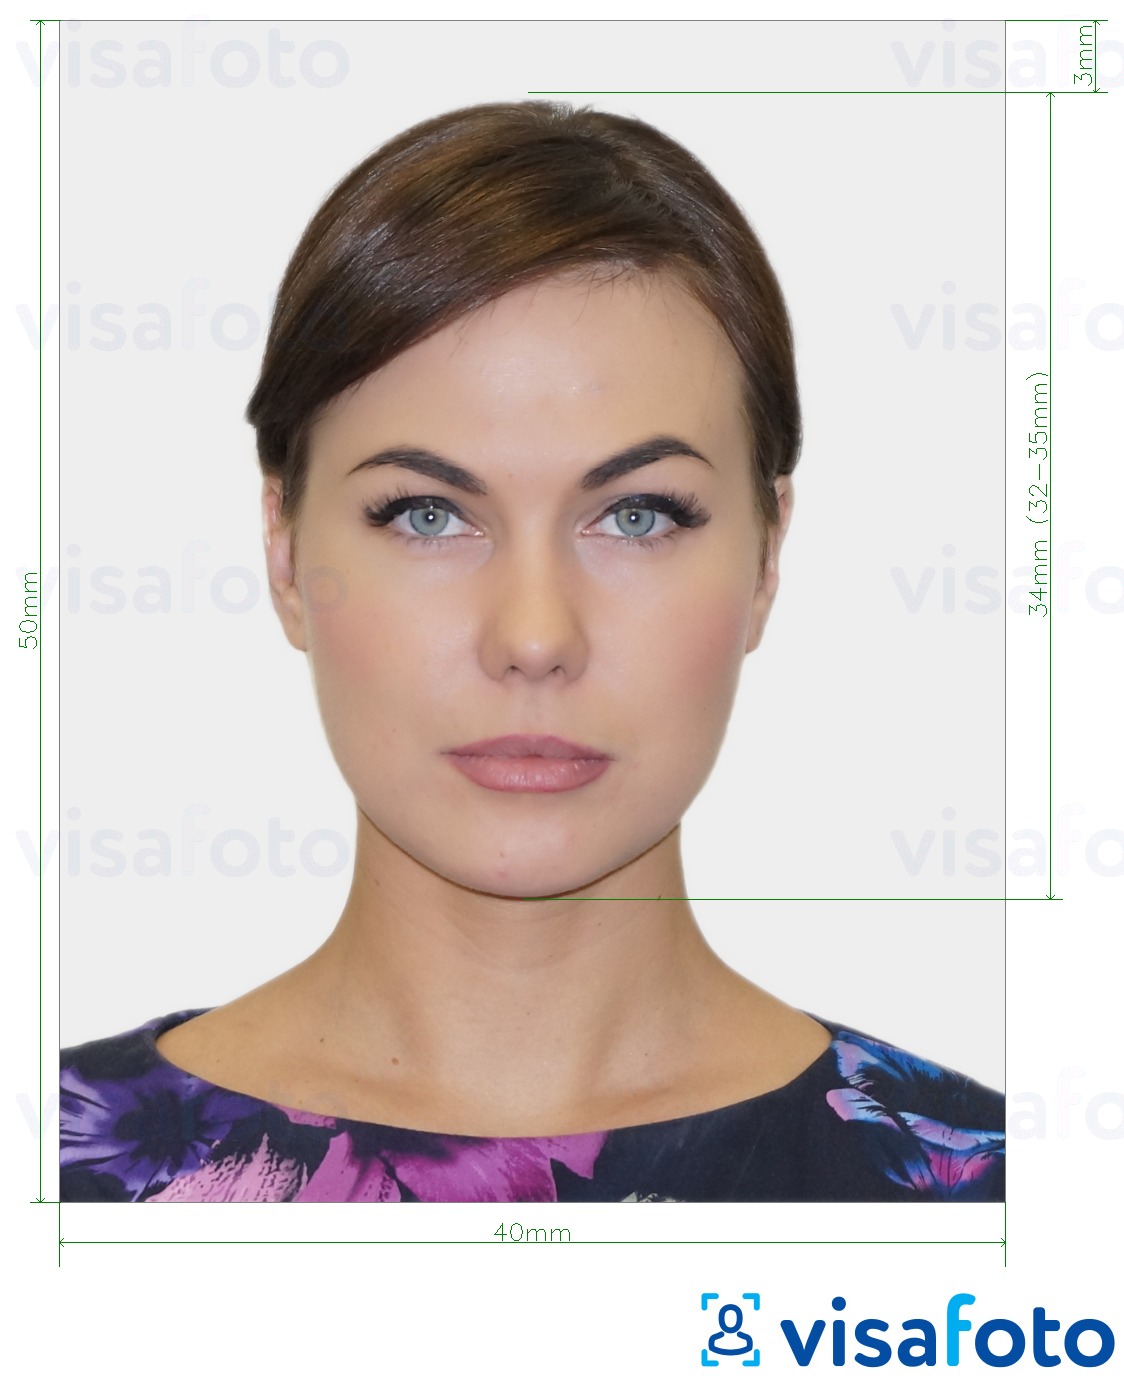 Example of photo for Belarus Passport 40x50 mm (4x5 cm) with exact size specification